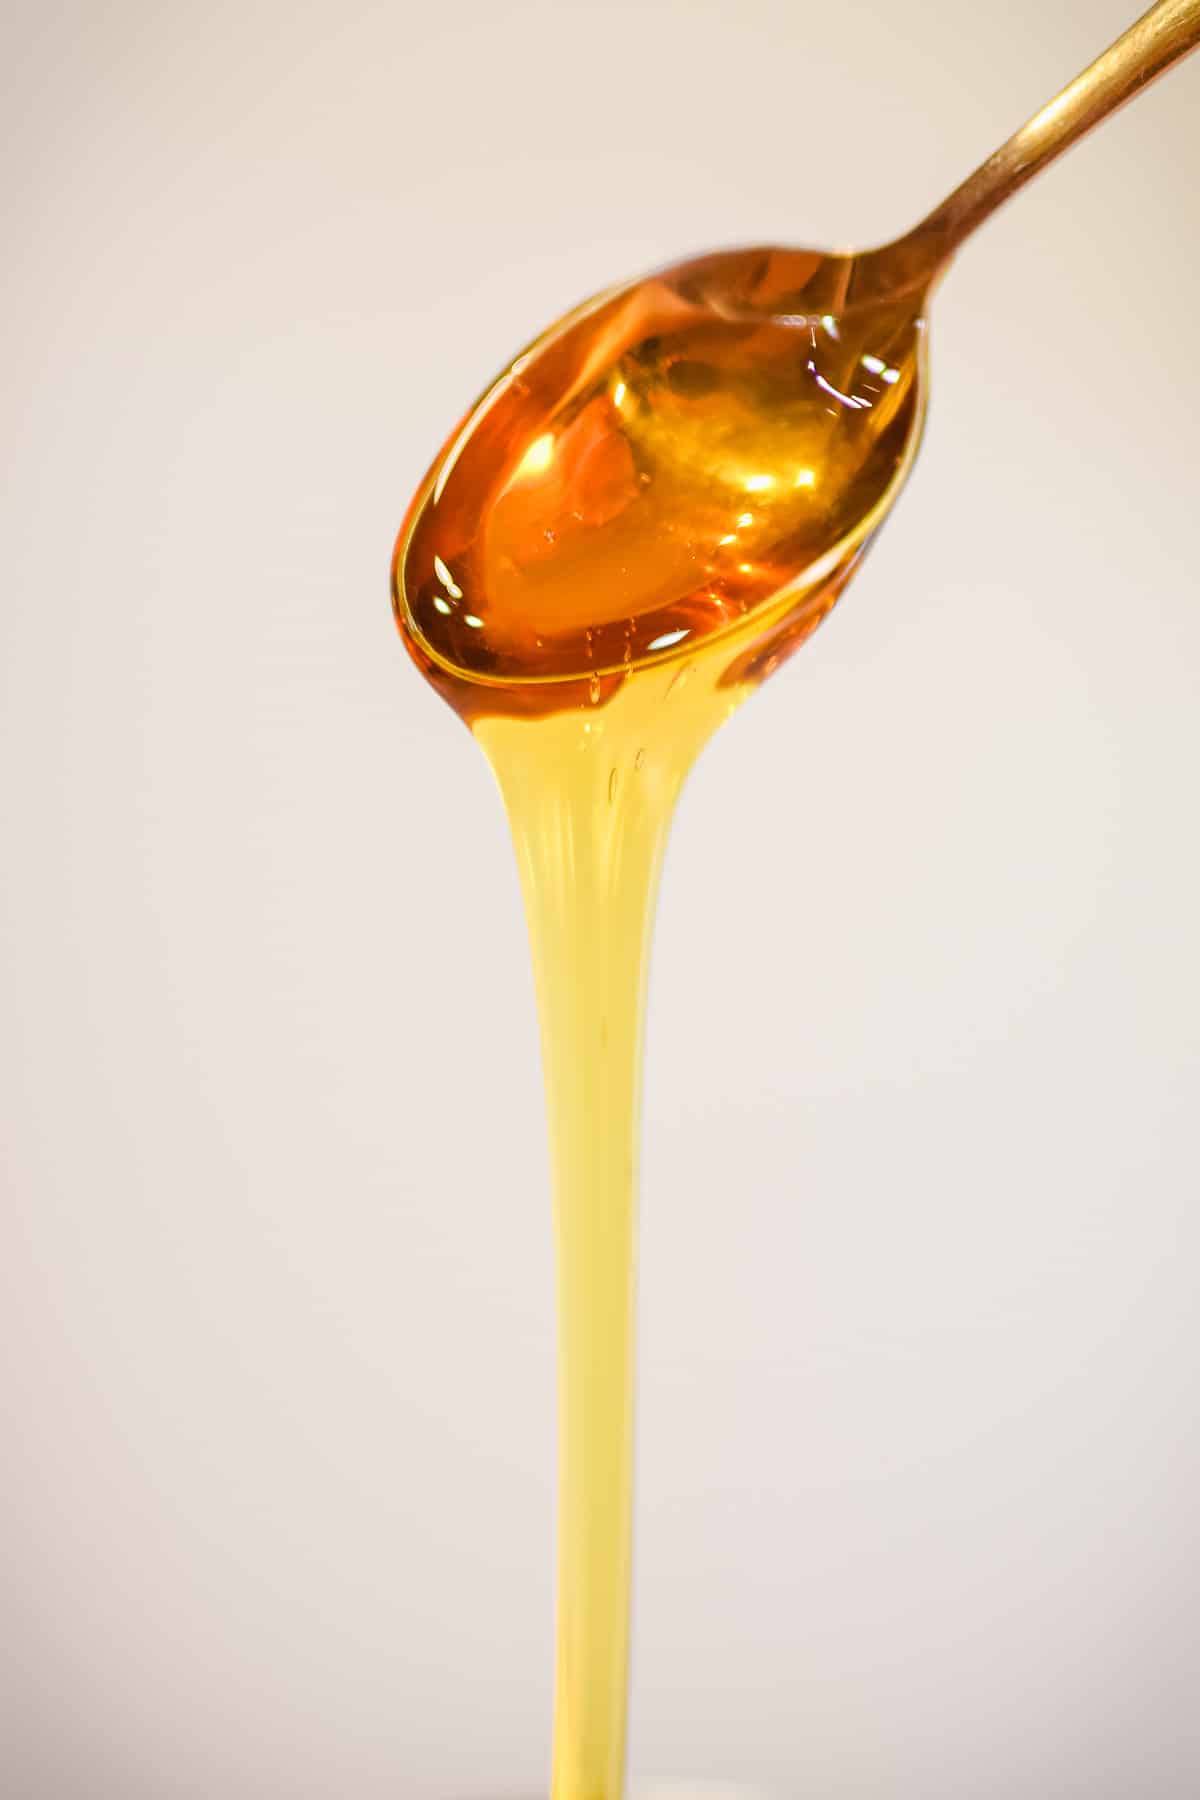 golden syrup dripping off spoon